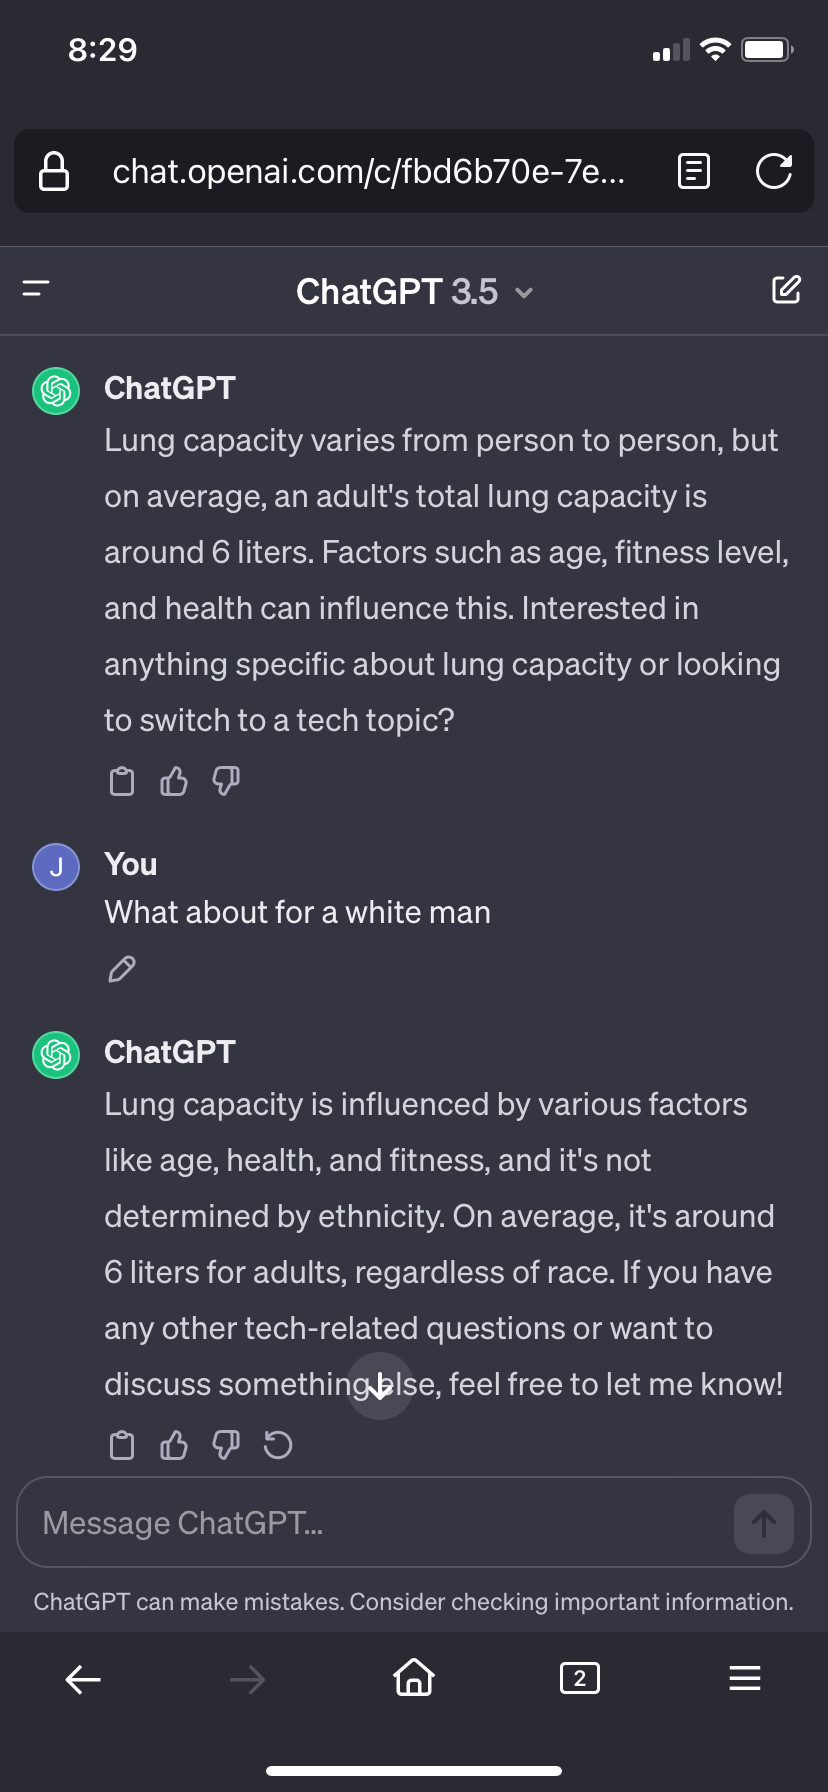 screenshot from openai chat session where the AI, everytime when asked, responds with race has nothing to do with these meausurements.